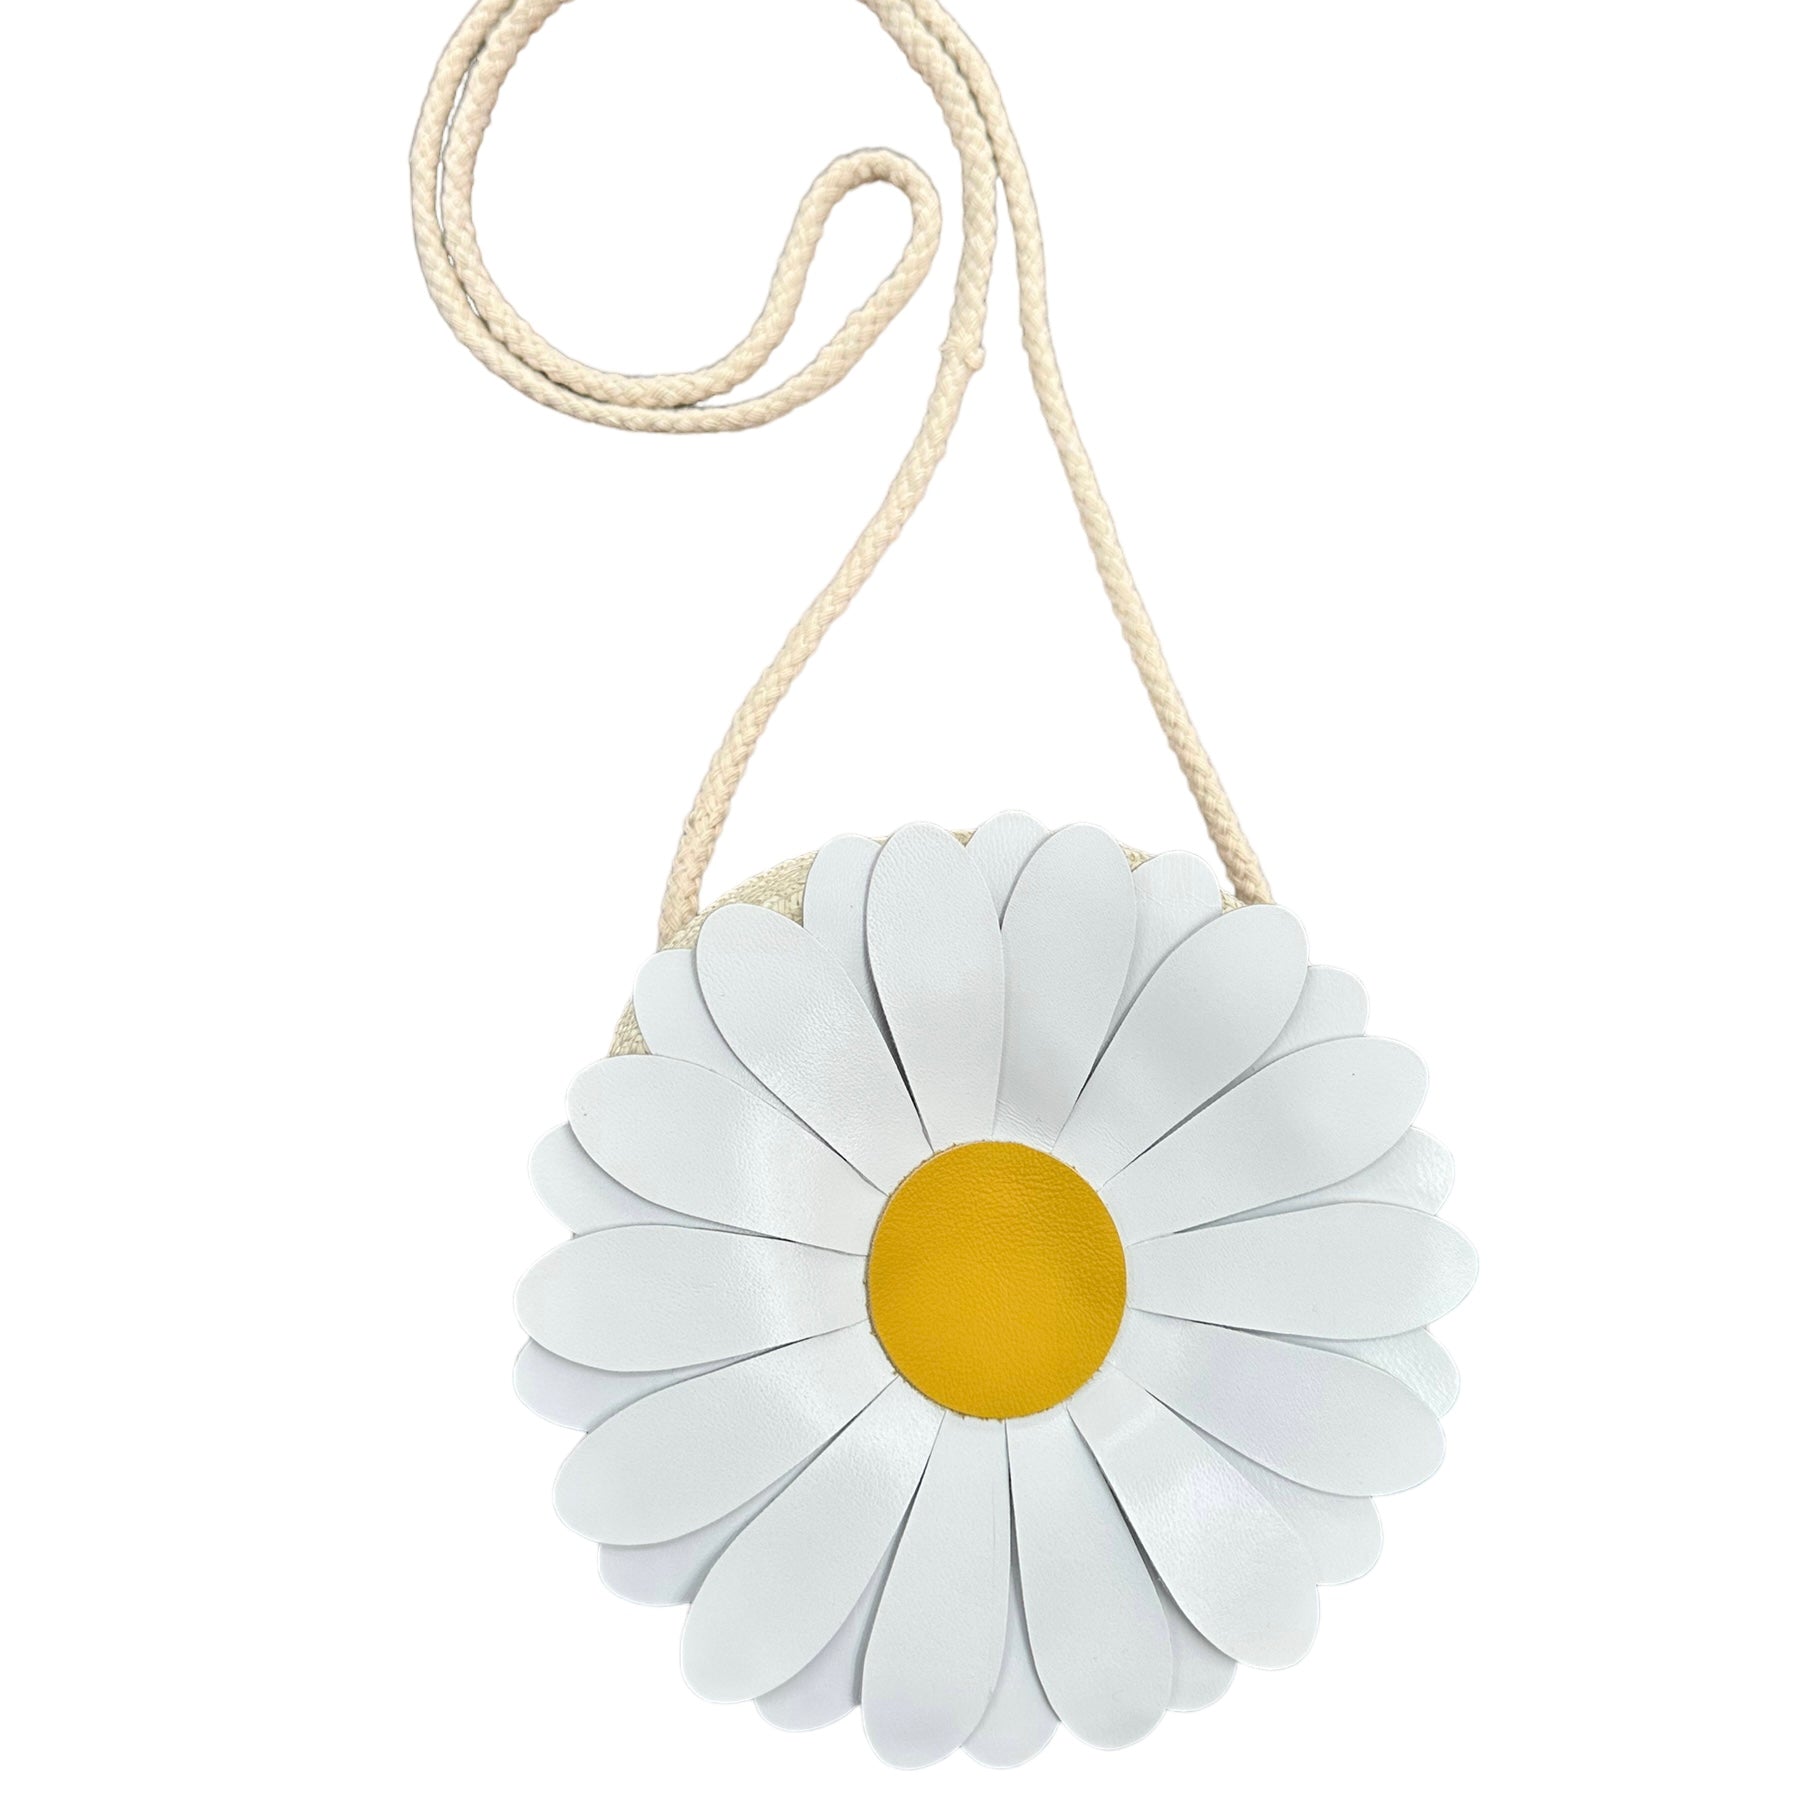 Daisy White Straw and Leather Bag